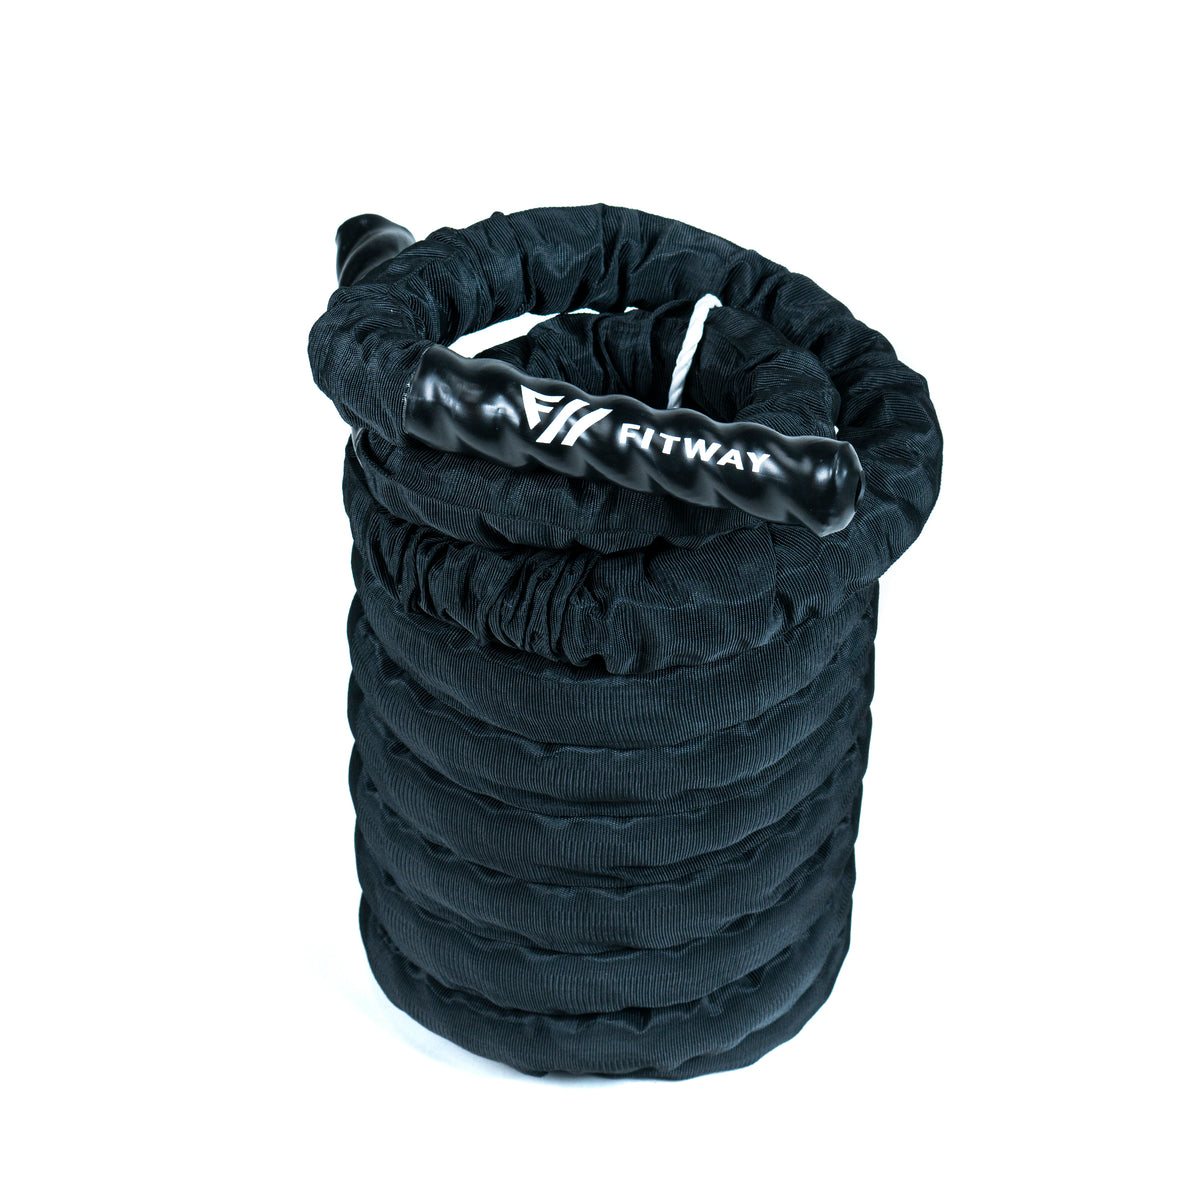 FitWay Equip. 40ft Battle Rope 